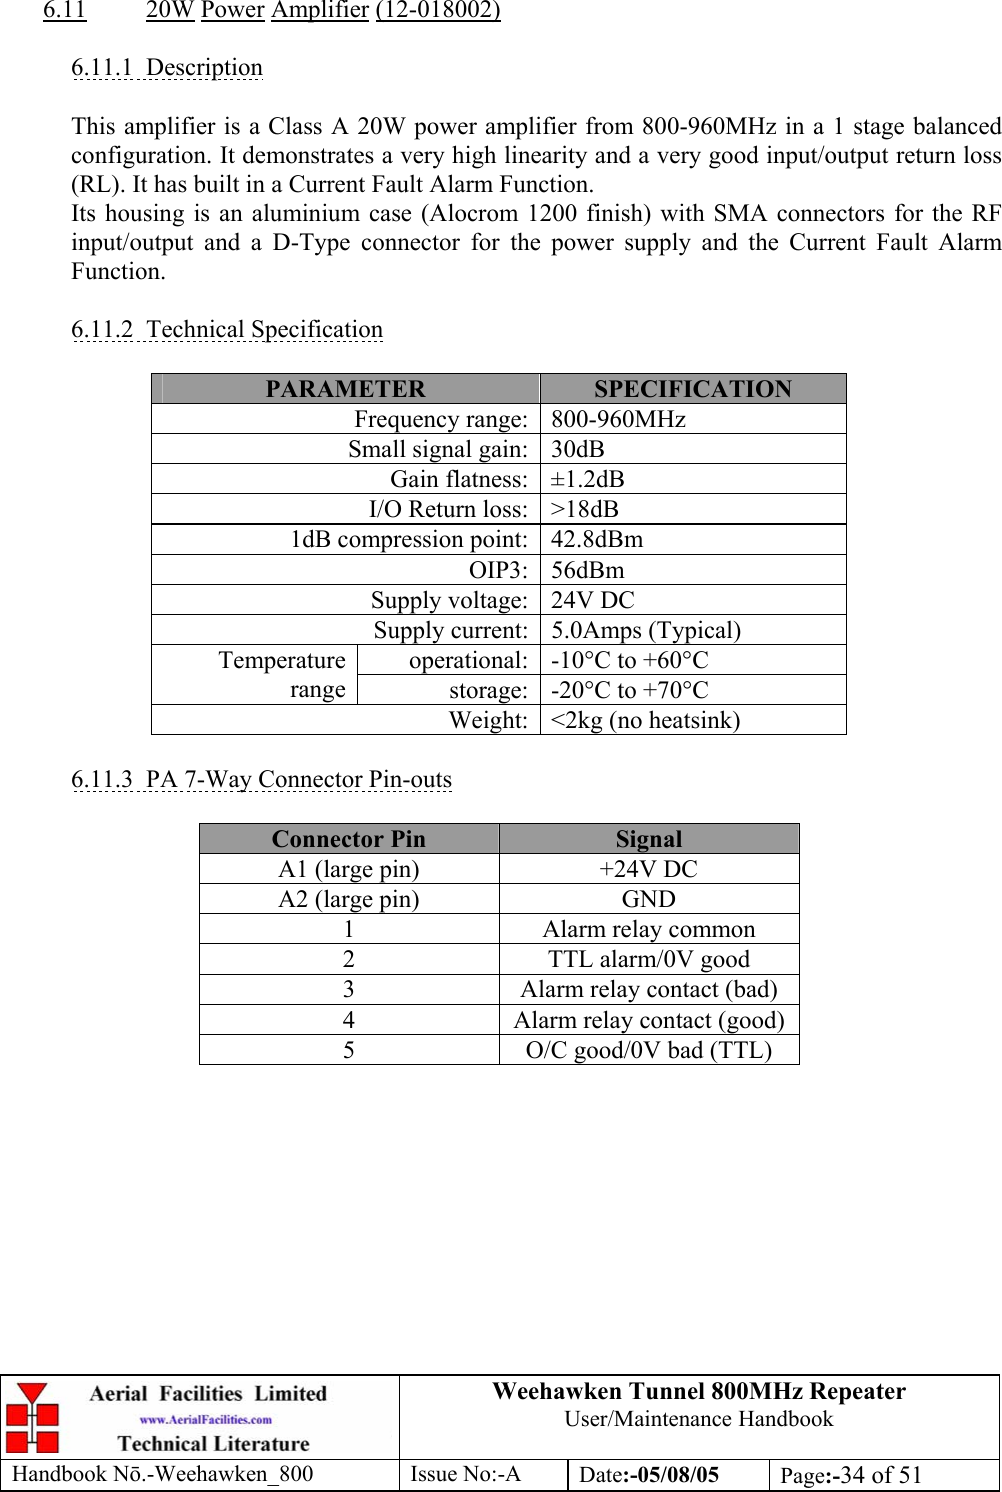 Weehawken Tunnel 800MHz Repeater User/Maintenance Handbook Handbook N.-Weehawken_800 Issue No:-A Date:-05/08/05  Page:-34 of 51   6.11 20W Power Amplifier (12-018002)  6.11.1 Description  This amplifier is a Class A 20W power amplifier from 800-960MHz in a 1 stage balanced configuration. It demonstrates a very high linearity and a very good input/output return loss (RL). It has built in a Current Fault Alarm Function. Its housing is an aluminium case (Alocrom 1200 finish) with SMA connectors for the RF input/output and a D-Type connector for the power supply and the Current Fault Alarm Function.  6.11.2 Technical Specification  PARAMETER  SPECIFICATION Frequency range: 800-960MHz Small signal gain: 30dB Gain flatness: ±1.2dB I/O Return loss: &gt;18dB 1dB compression point: 42.8dBm OIP3: 56dBm Supply voltage: 24V DC Supply current: 5.0Amps (Typical) operational: -10°C to +60°C Temperature range  storage: -20°C to +70°C Weight: &lt;2kg (no heatsink)  6.11.3  PA 7-Way Connector Pin-outs  Connector Pin  Signal A1 (large pin)  +24V DC A2 (large pin)  GND 1  Alarm relay common 2  TTL alarm/0V good 3  Alarm relay contact (bad) 4  Alarm relay contact (good) 5  O/C good/0V bad (TTL)  